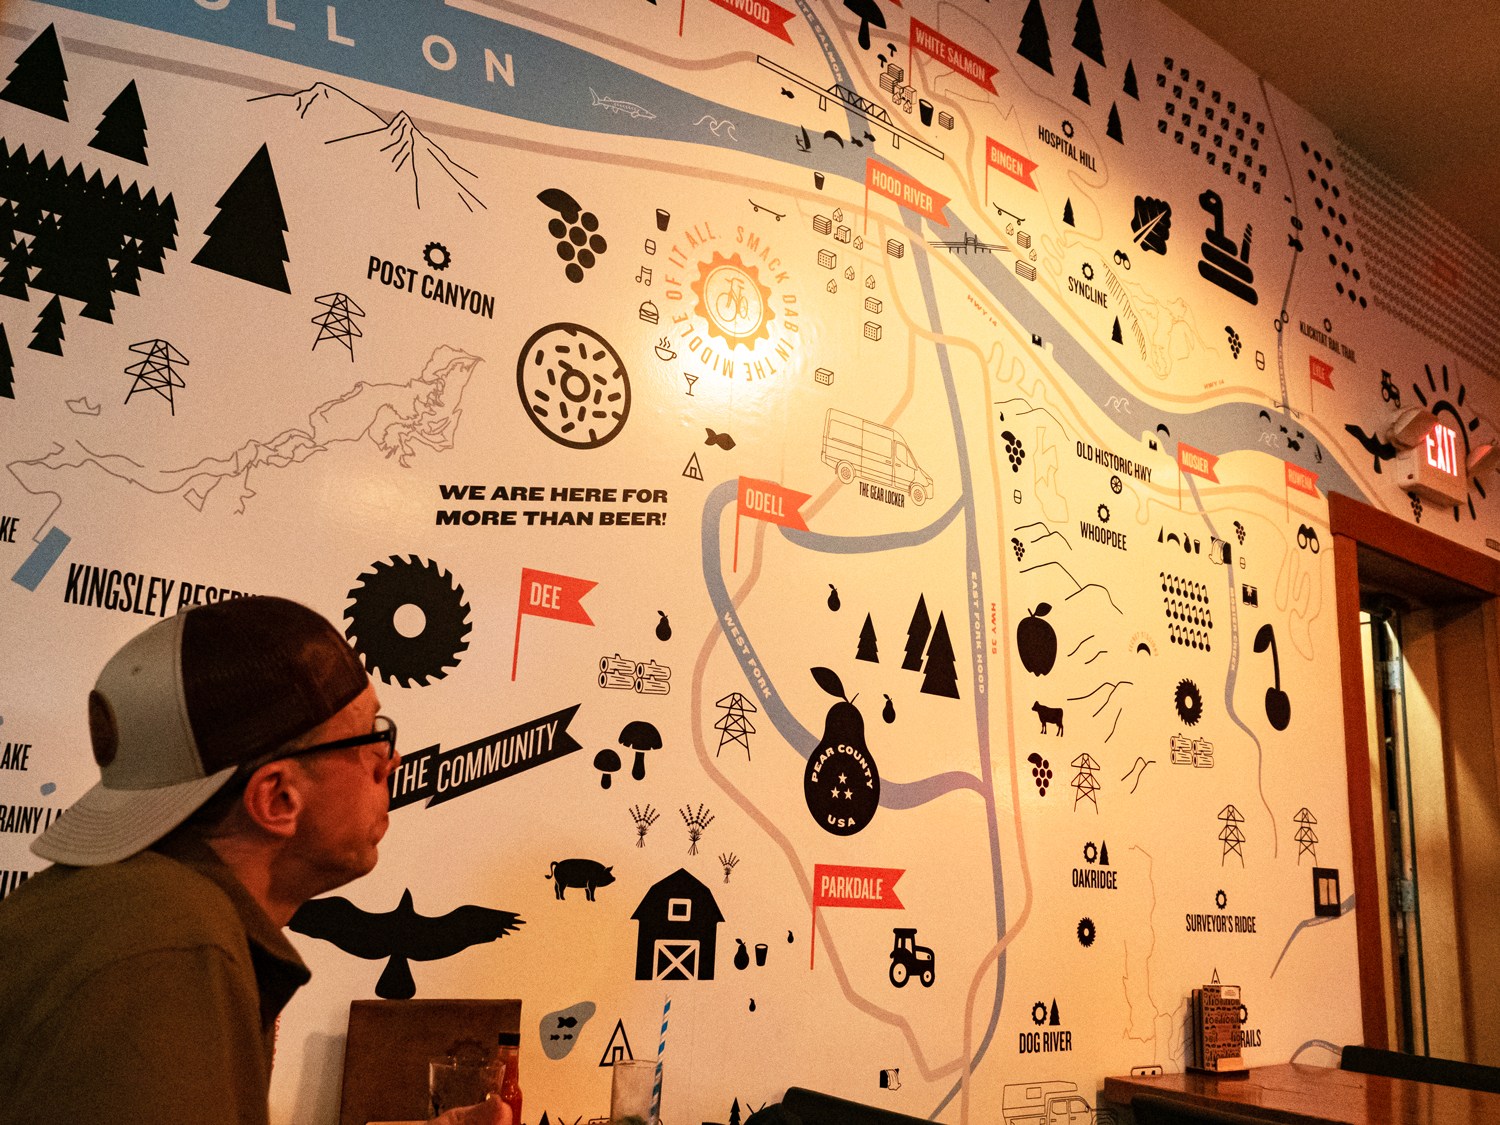 The fun map painting of Hood River at Kickstand Coffee